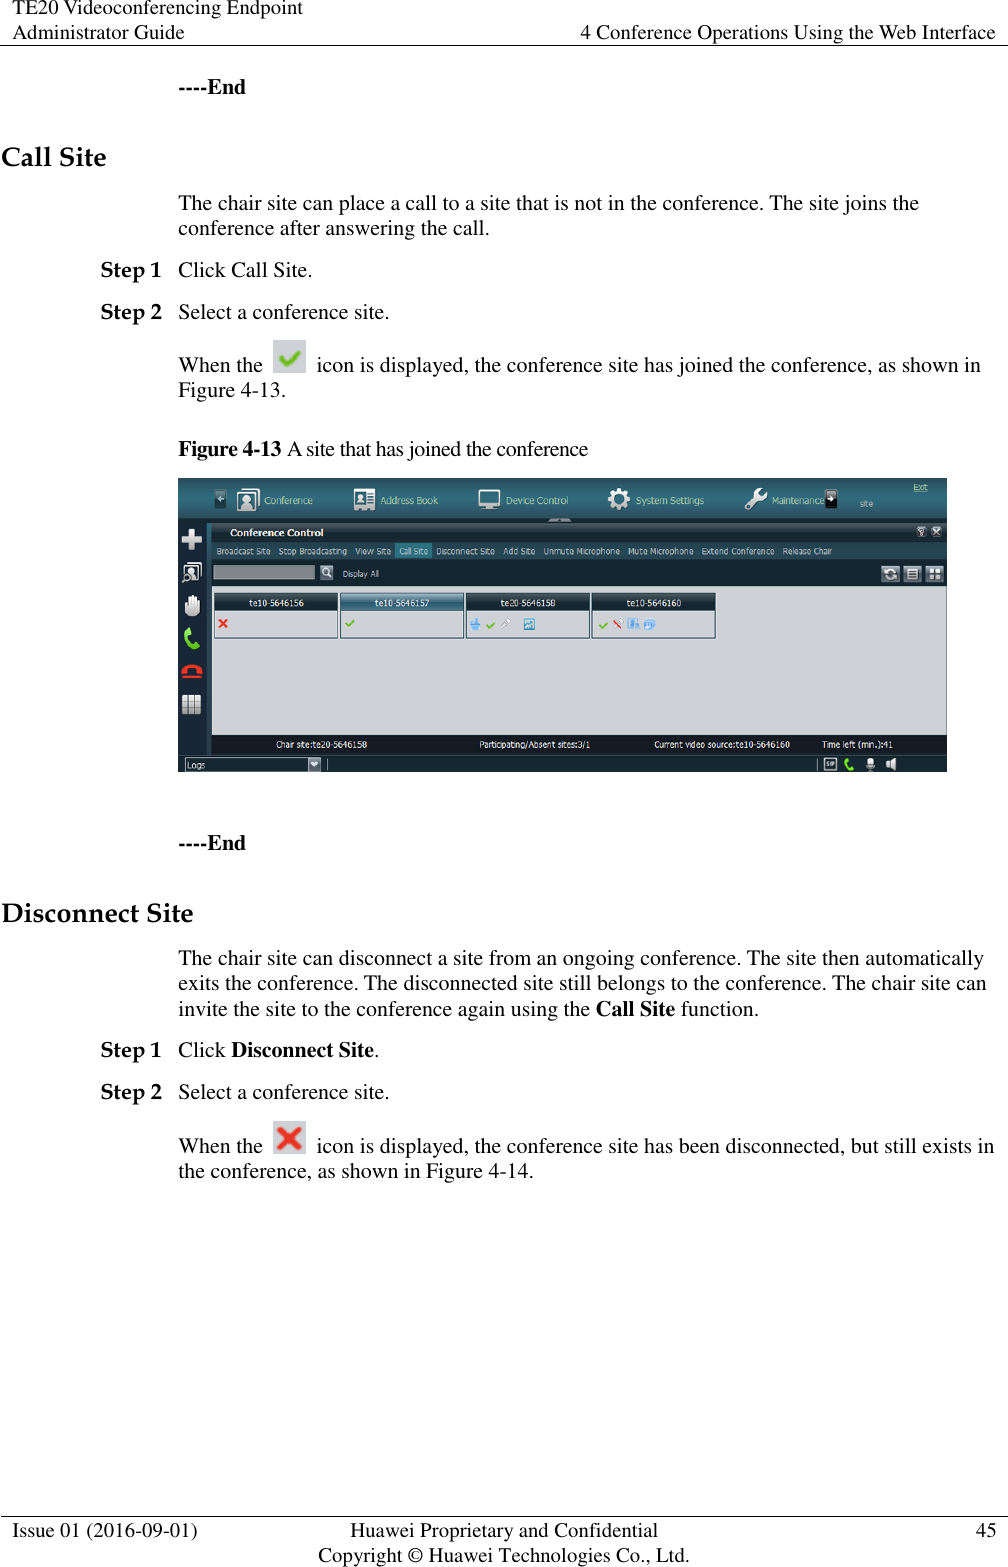 TE20 Videoconferencing Endpoint Administrator Guide 4 Conference Operations Using the Web Interface  Issue 01 (2016-09-01) Huawei Proprietary and Confidential                                     Copyright © Huawei Technologies Co., Ltd. 45  ----End Call Site The chair site can place a call to a site that is not in the conference. The site joins the conference after answering the call. Step 1 Click Call Site. Step 2 Select a conference site. When the    icon is displayed, the conference site has joined the conference, as shown in Figure 4-13. Figure 4-13 A site that has joined the conference   ----End Disconnect Site The chair site can disconnect a site from an ongoing conference. The site then automatically exits the conference. The disconnected site still belongs to the conference. The chair site can invite the site to the conference again using the Call Site function. Step 1 Click Disconnect Site. Step 2 Select a conference site. When the    icon is displayed, the conference site has been disconnected, but still exists in the conference, as shown in Figure 4-14. 